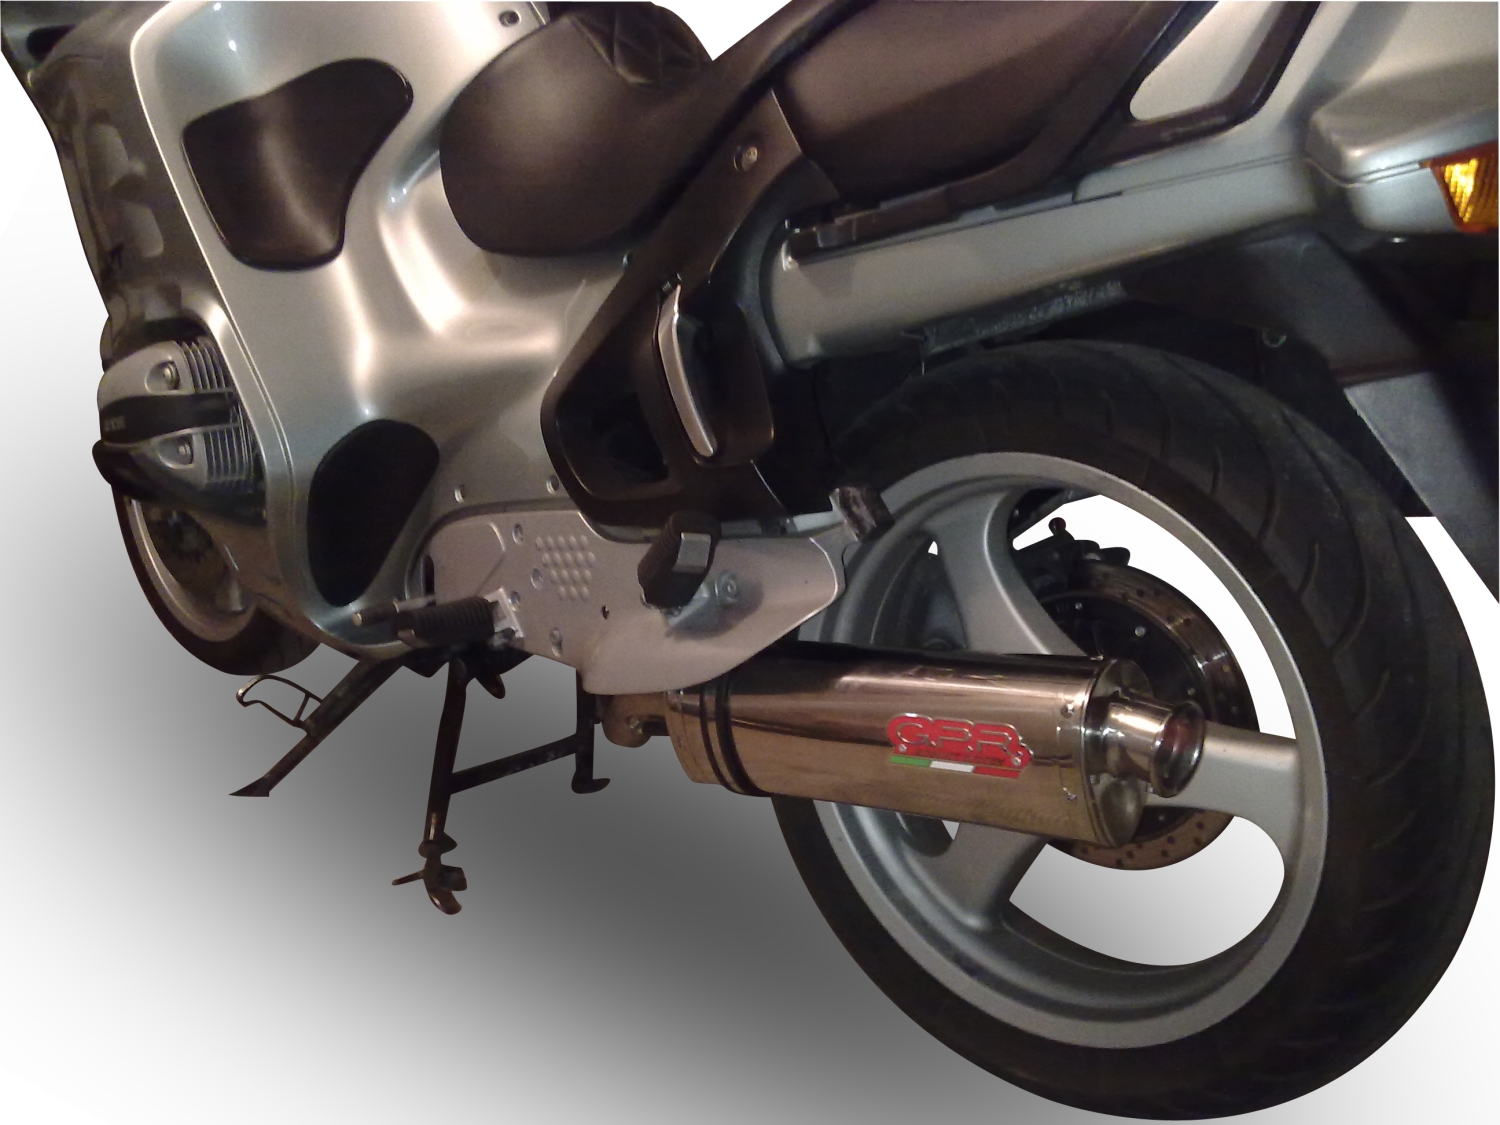 Exhaust system compatible with Bmw R 850 R - GS 1994-2002, Trioval, Homologated legal slip-on exhaust including removable db killer, link pipe and catalyst 